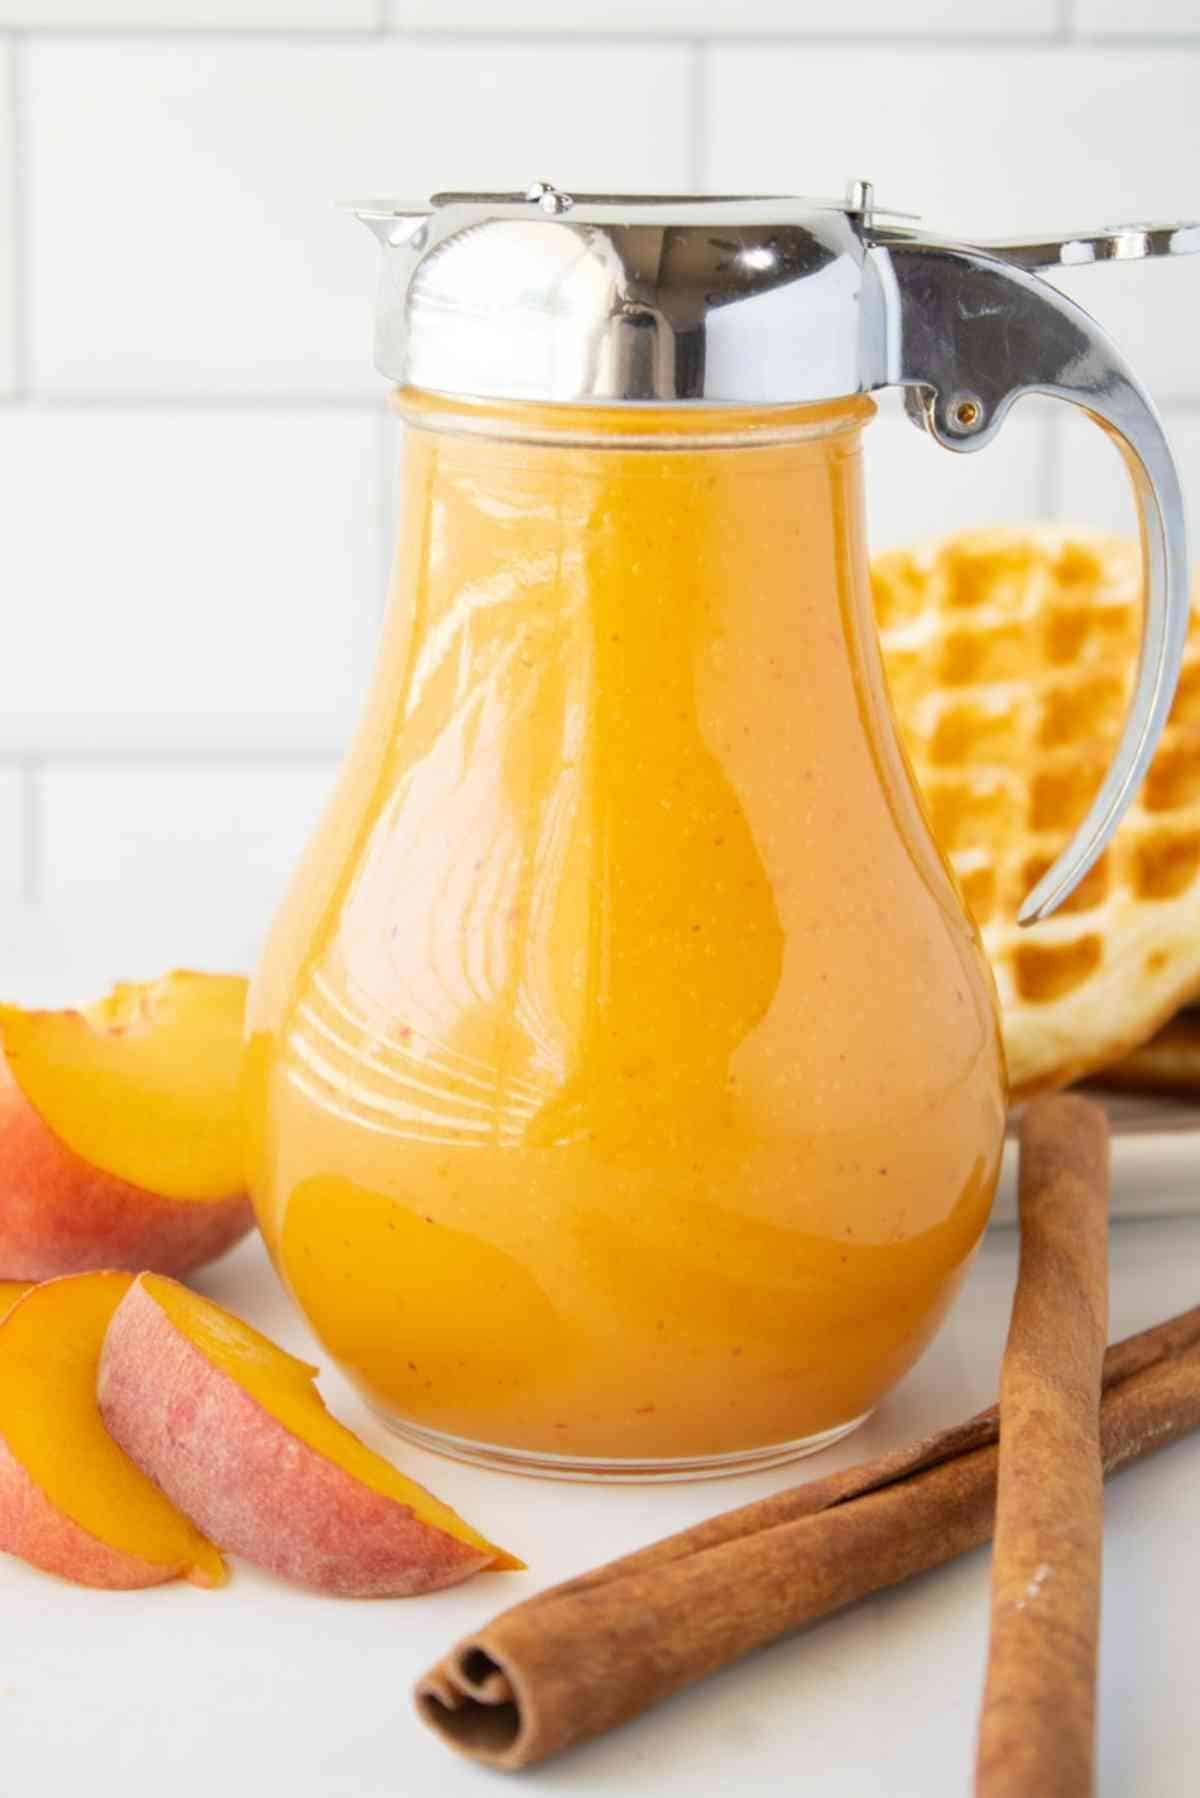 Spiced Peach Syrup in a glass pitcher.